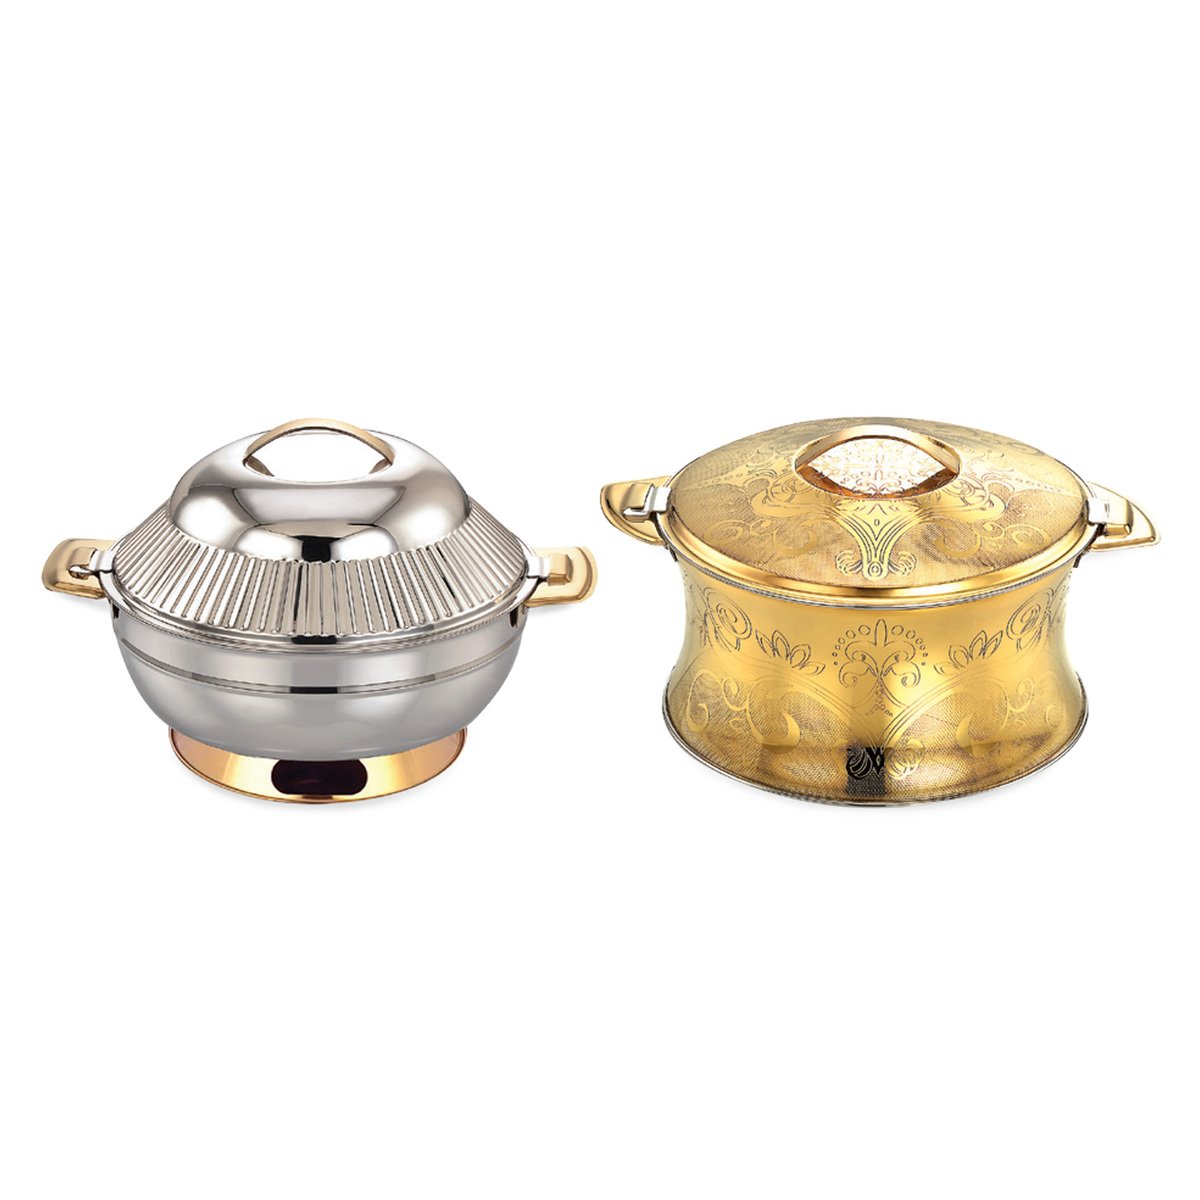 Black Stone Stainless Steel Hot Pot 2500ml Gold 1pc Assorted Style